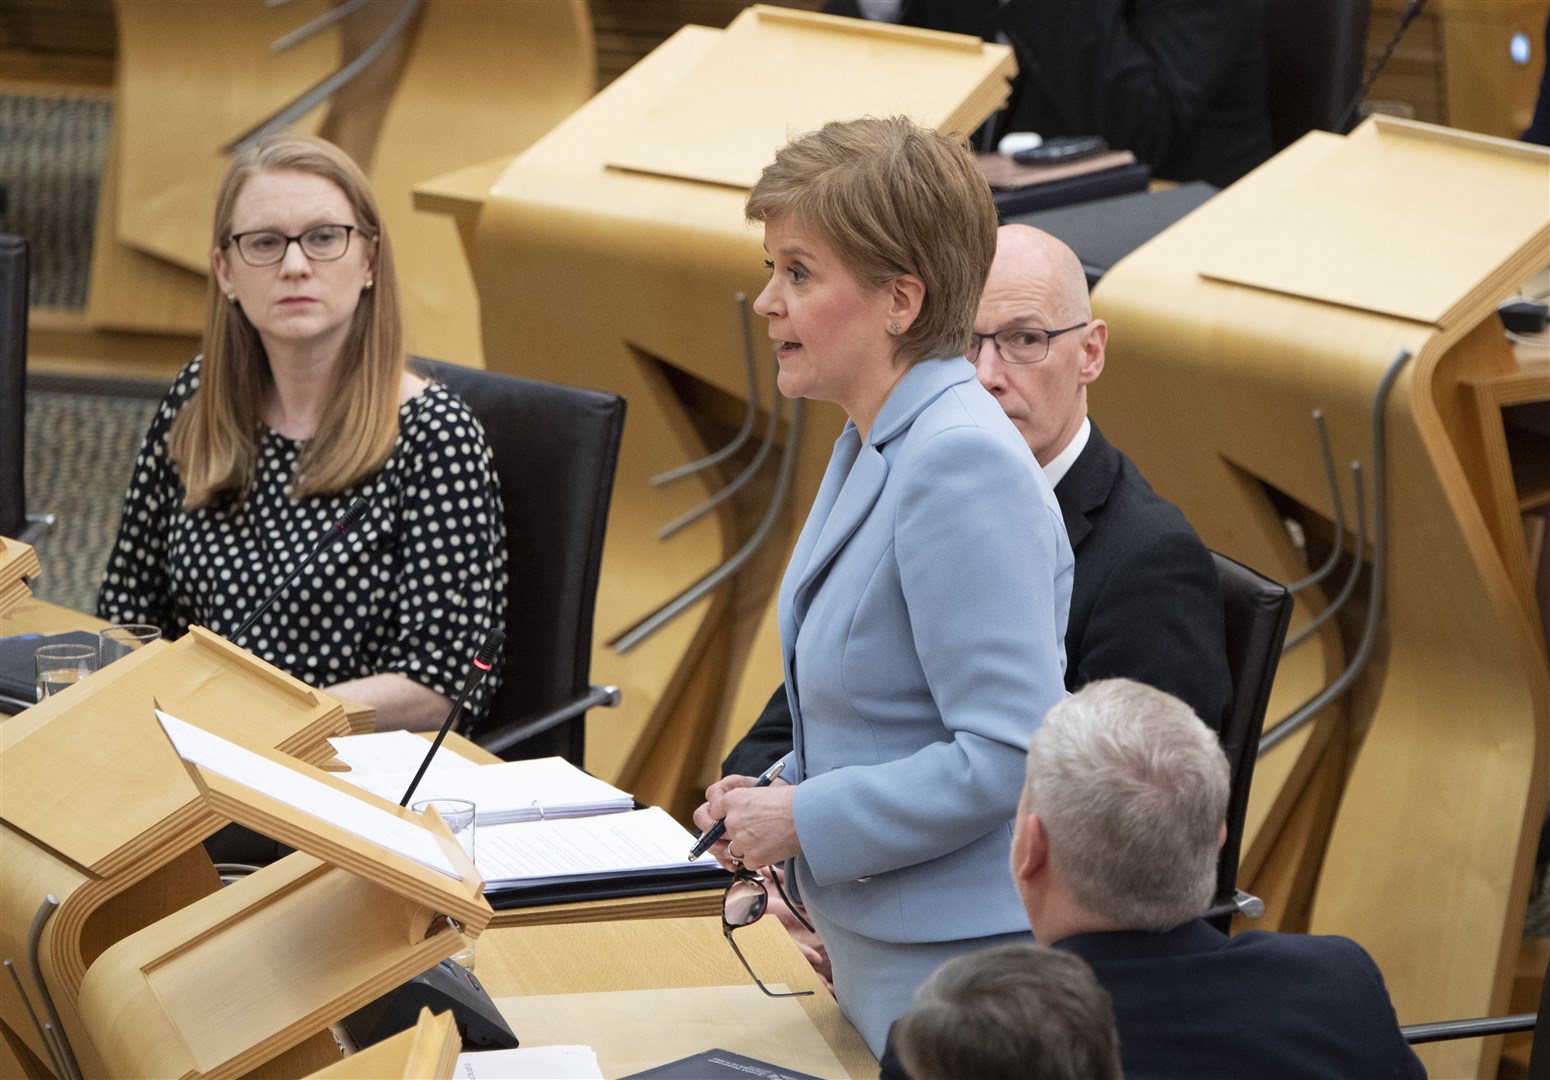 First Minister Nicola Sturgeon announced on Tuesday that she intends on holding a referendum in October 2023 (Lesley Martin/PA)